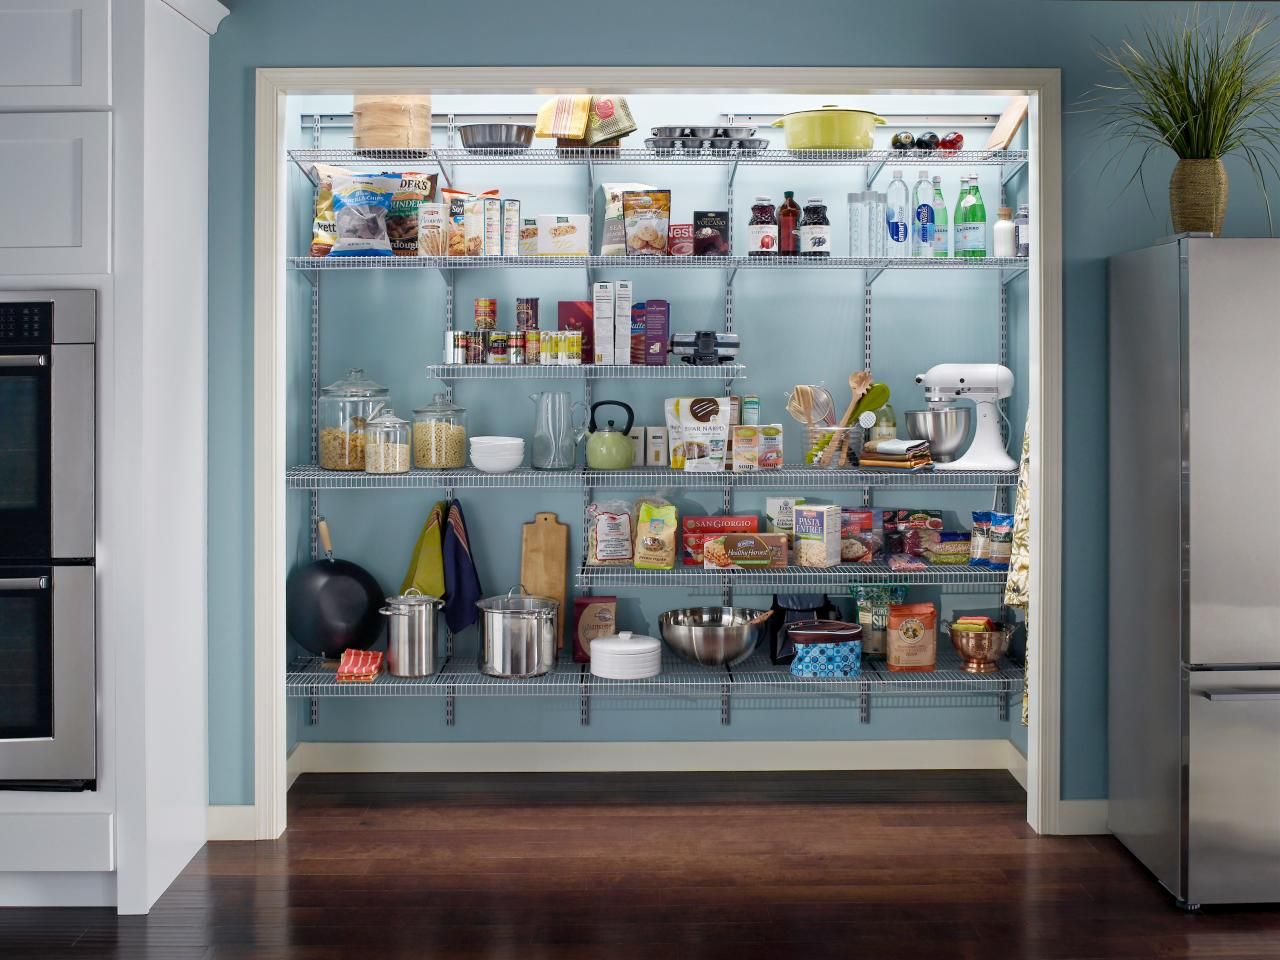 Kitchen pantry - a solution fit to your needs